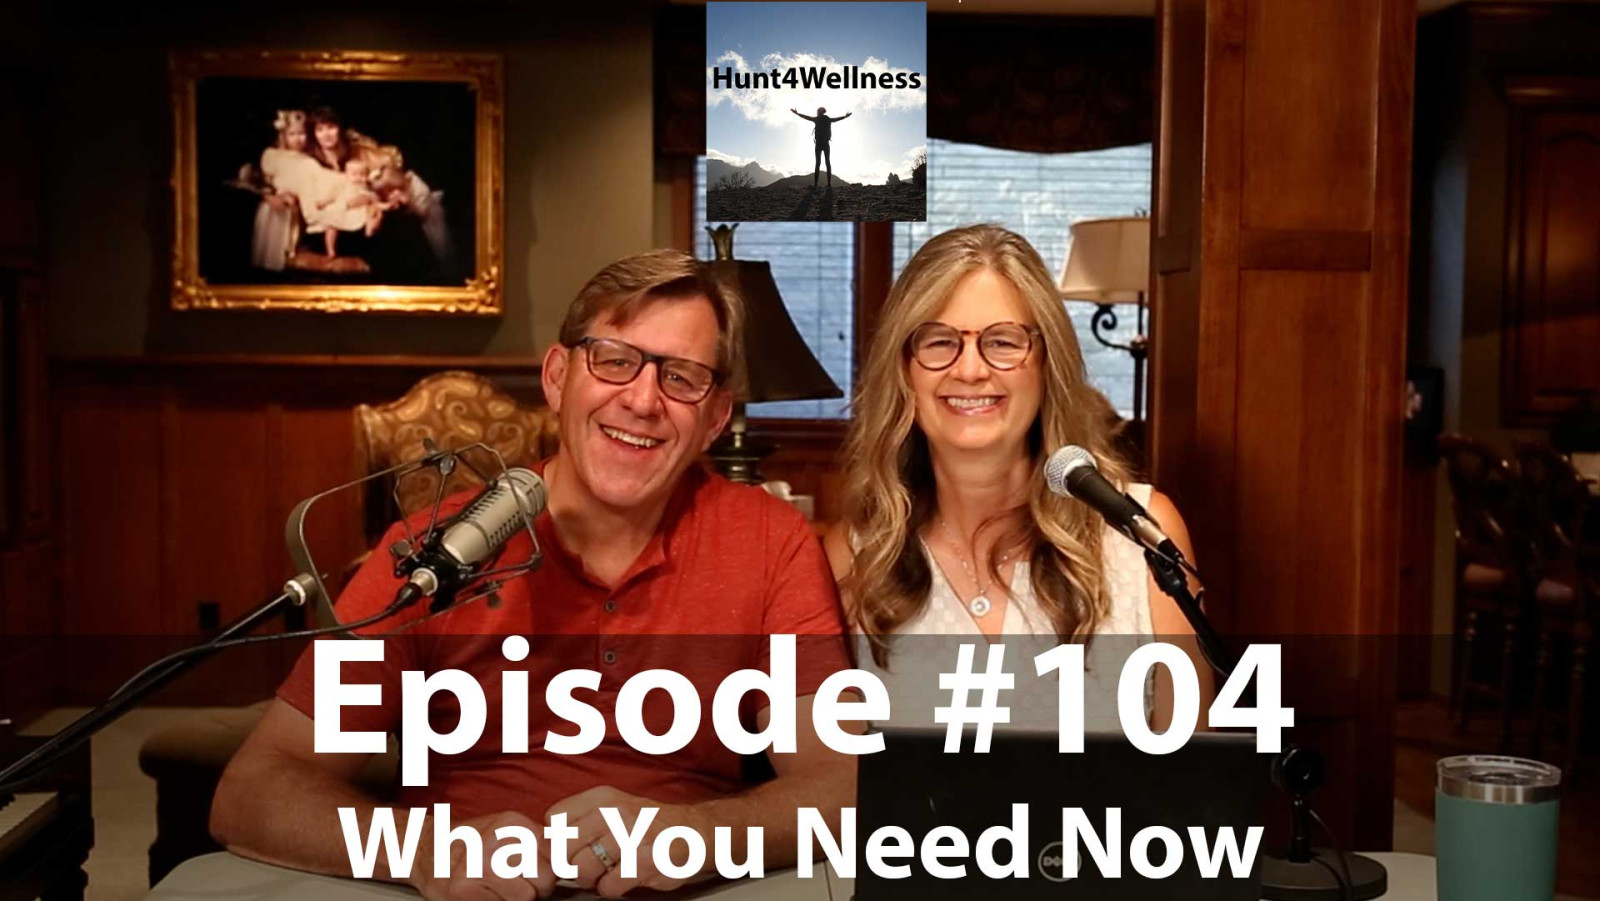 Episode #104 - What You Need Now